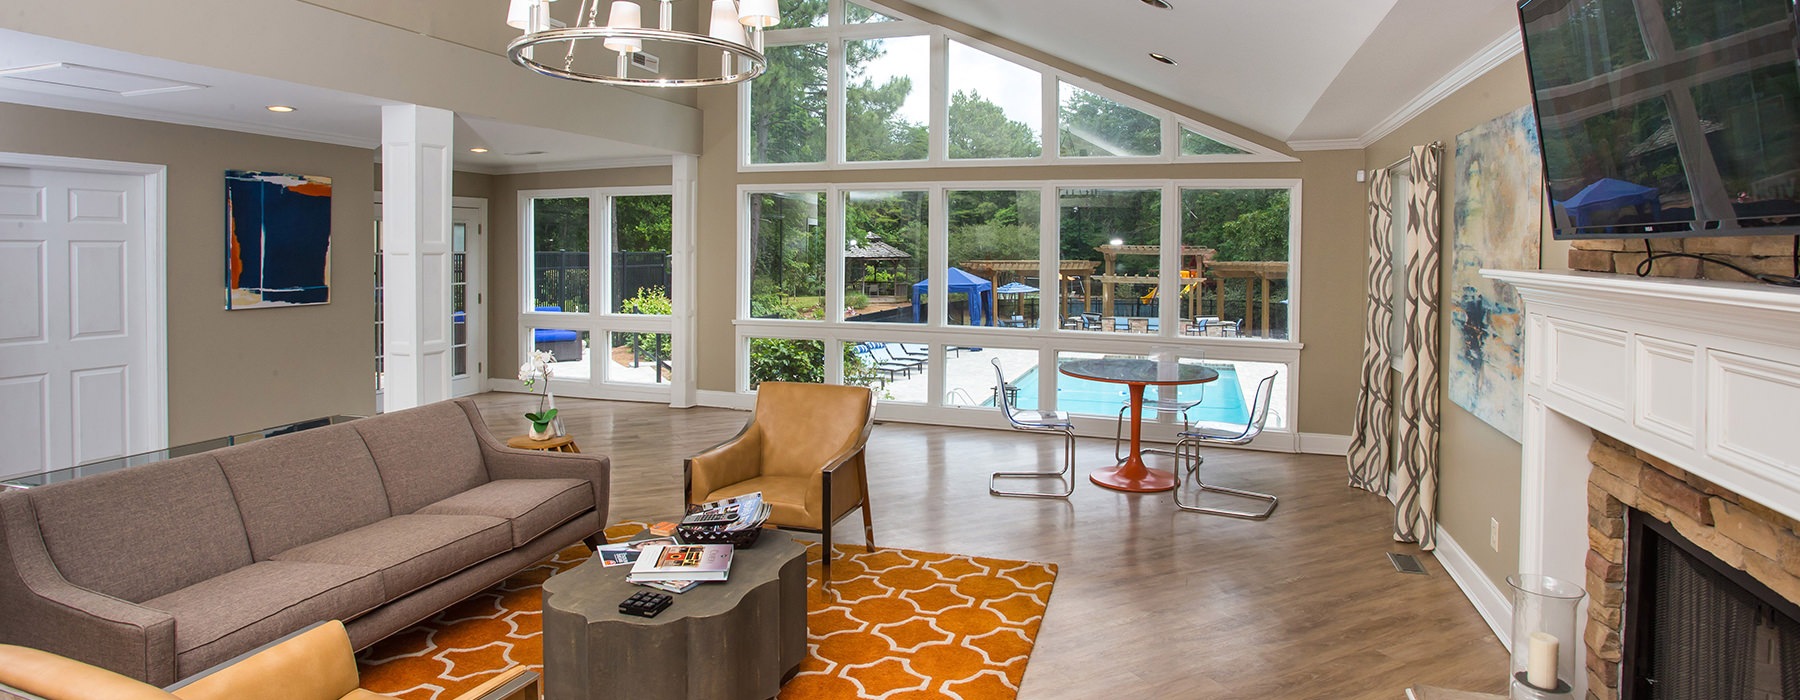 Resident lounge area by pool at 700 Riverchase Apartments in Hoover, AL